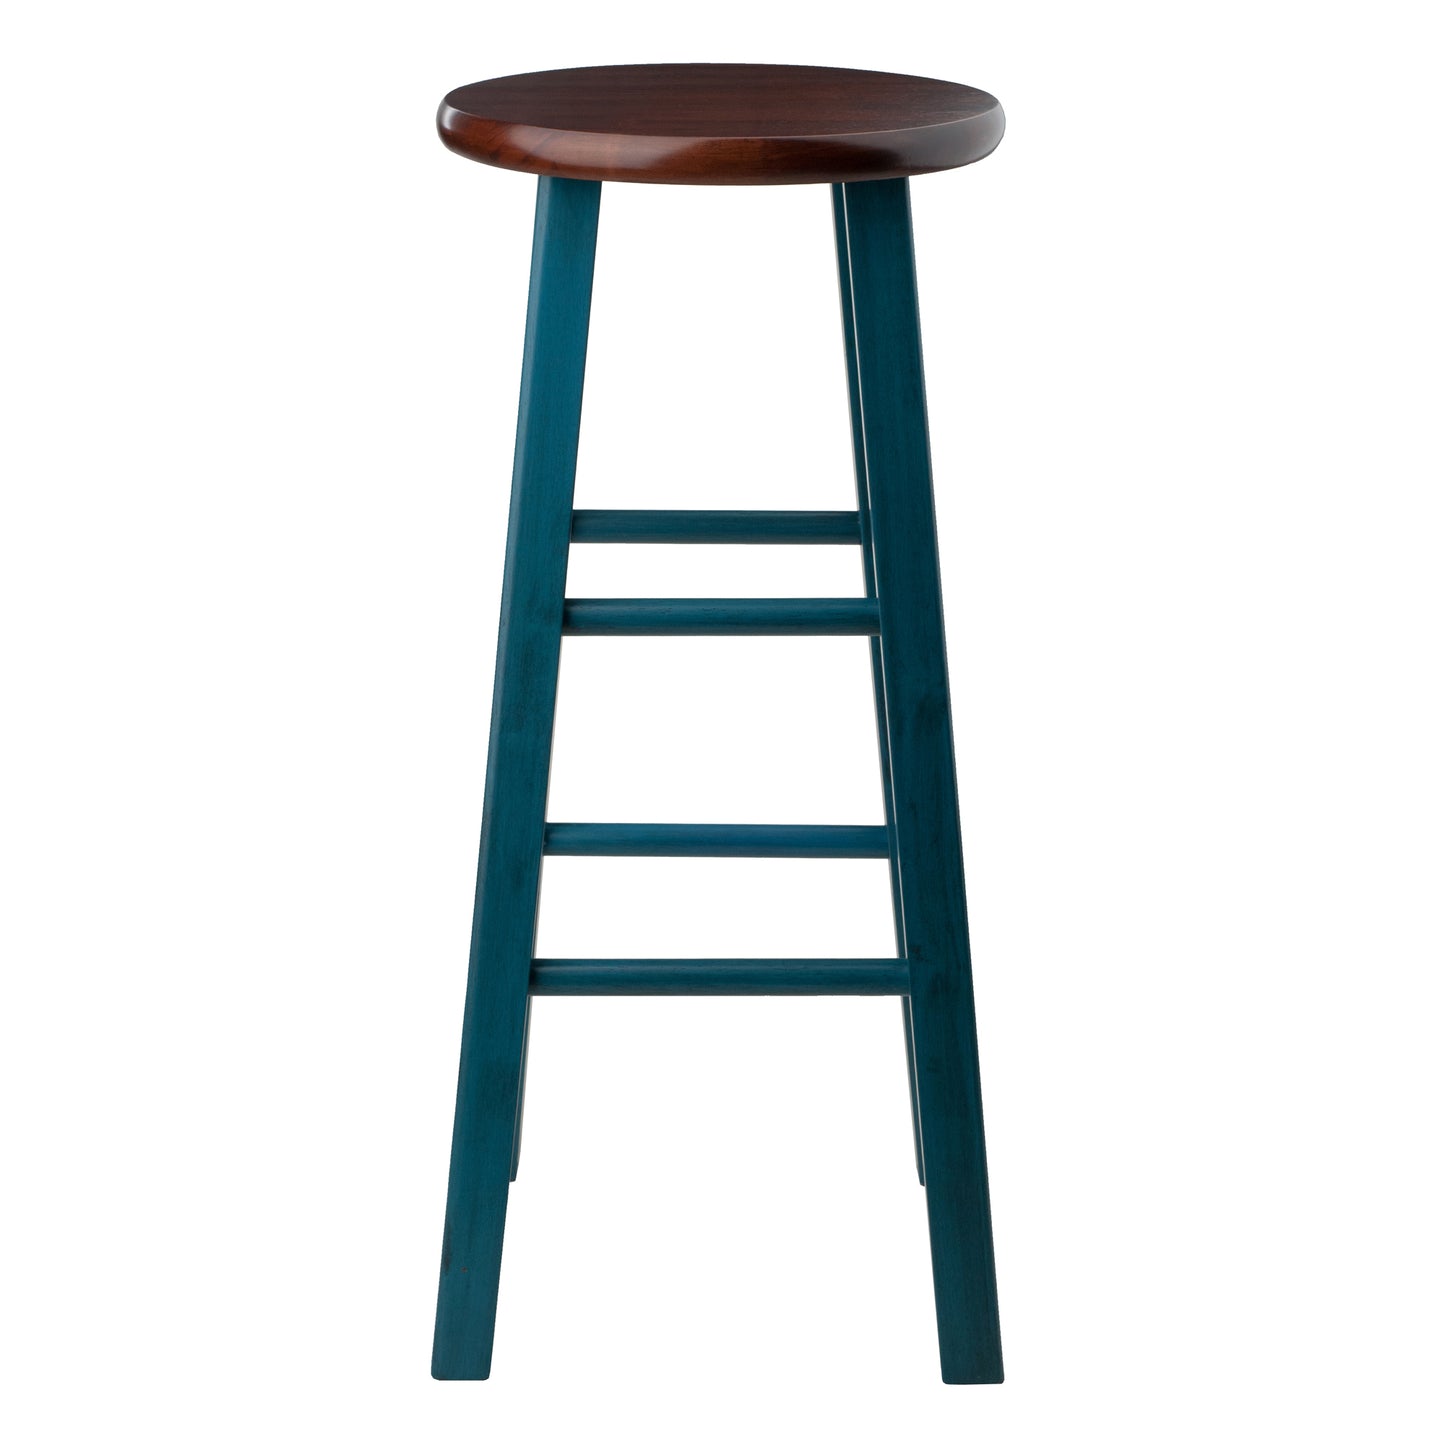 Ivy Bar Stool, Rustic Teal and Walnut